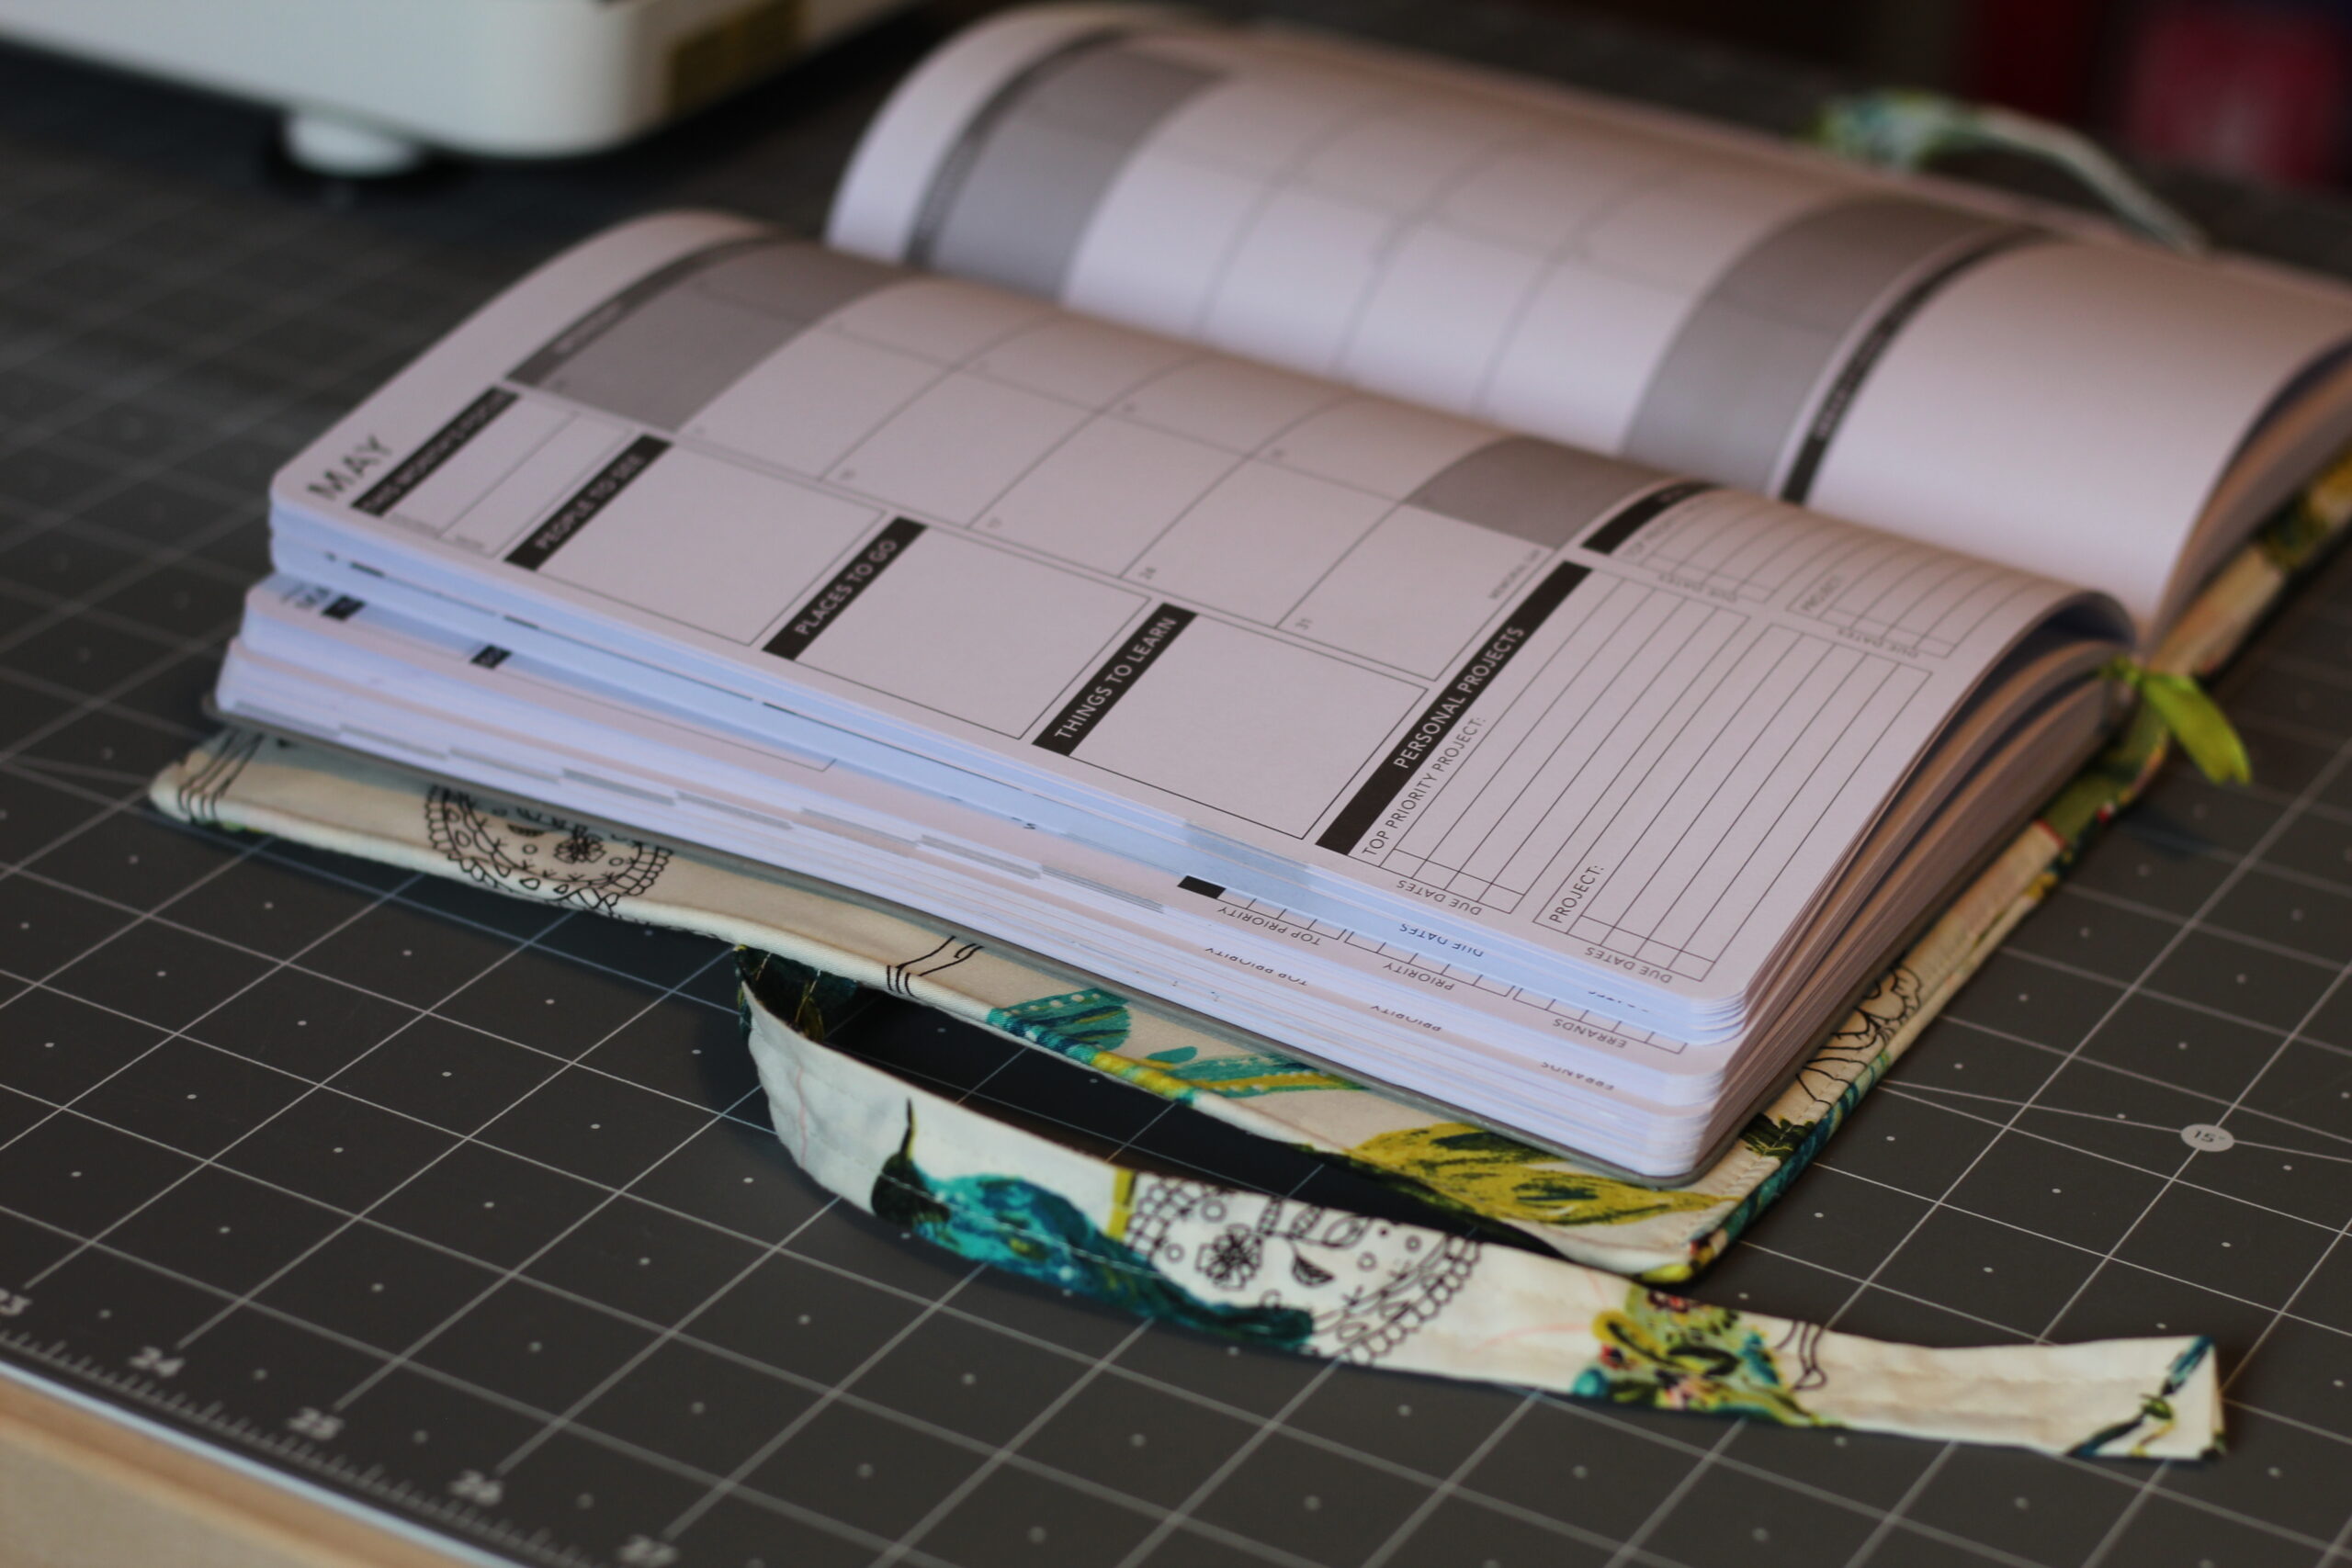 Sewspire Design Board #122220: How to sew a custom planner cover for the New Year